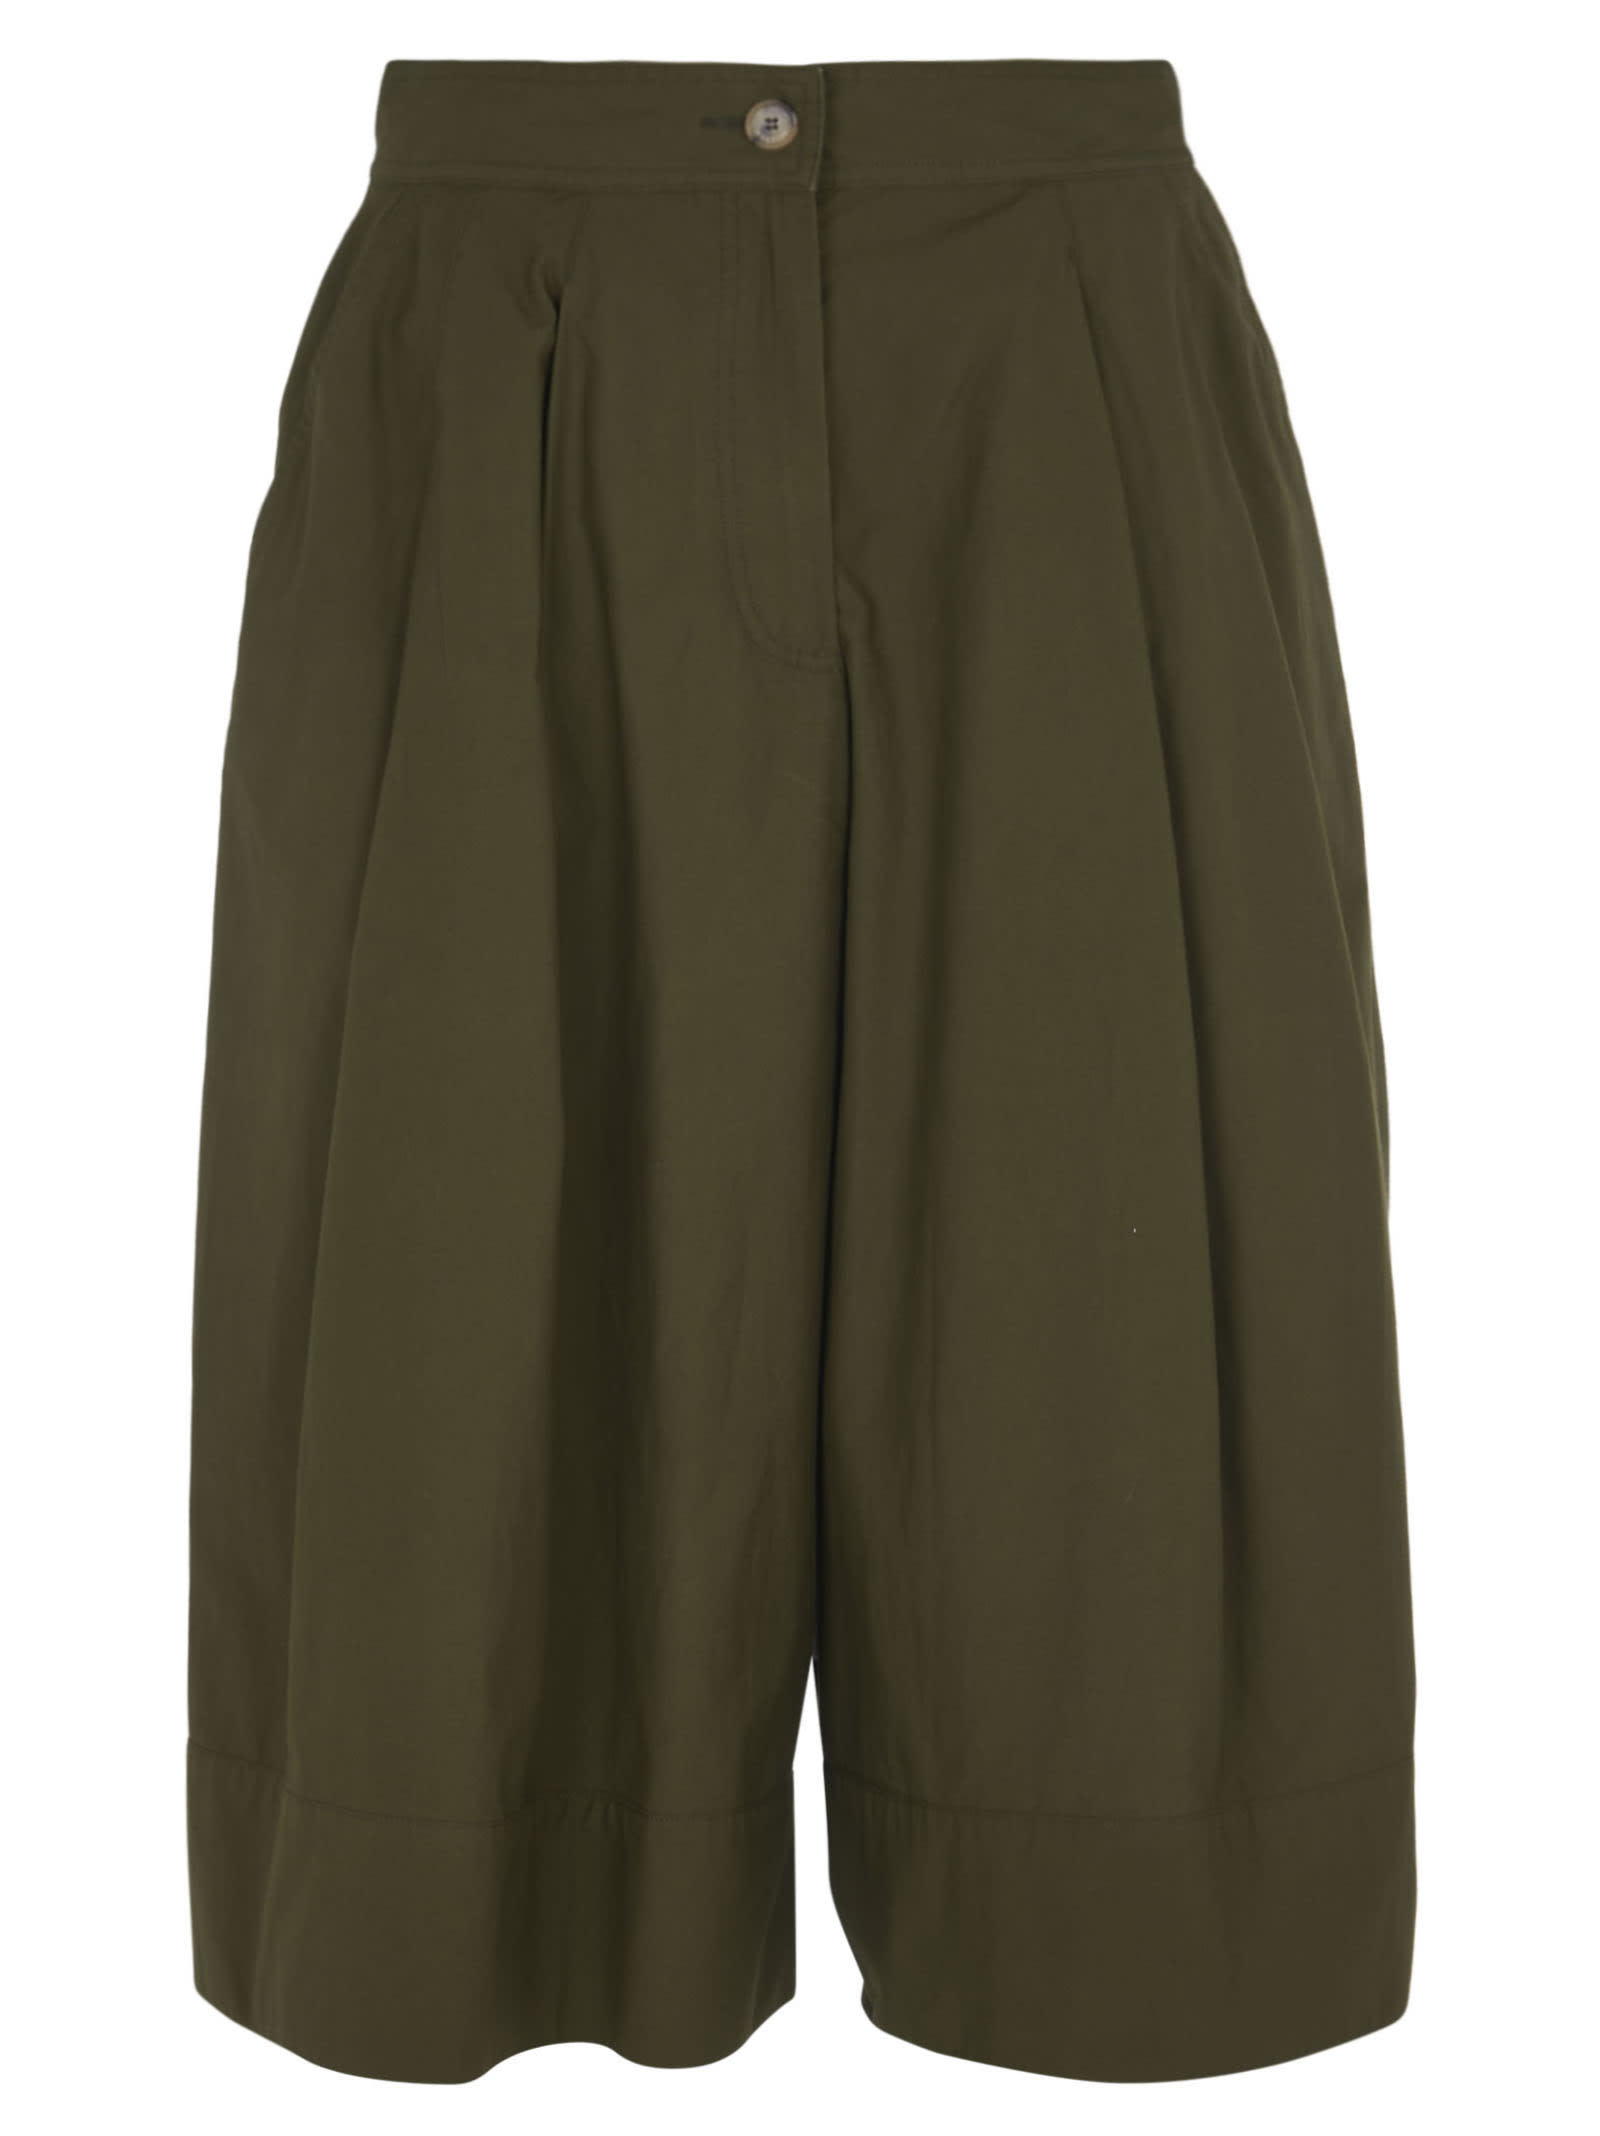 MONCLER BUTTONED CROPPED TROUSERS,2B000 01 M1145 833